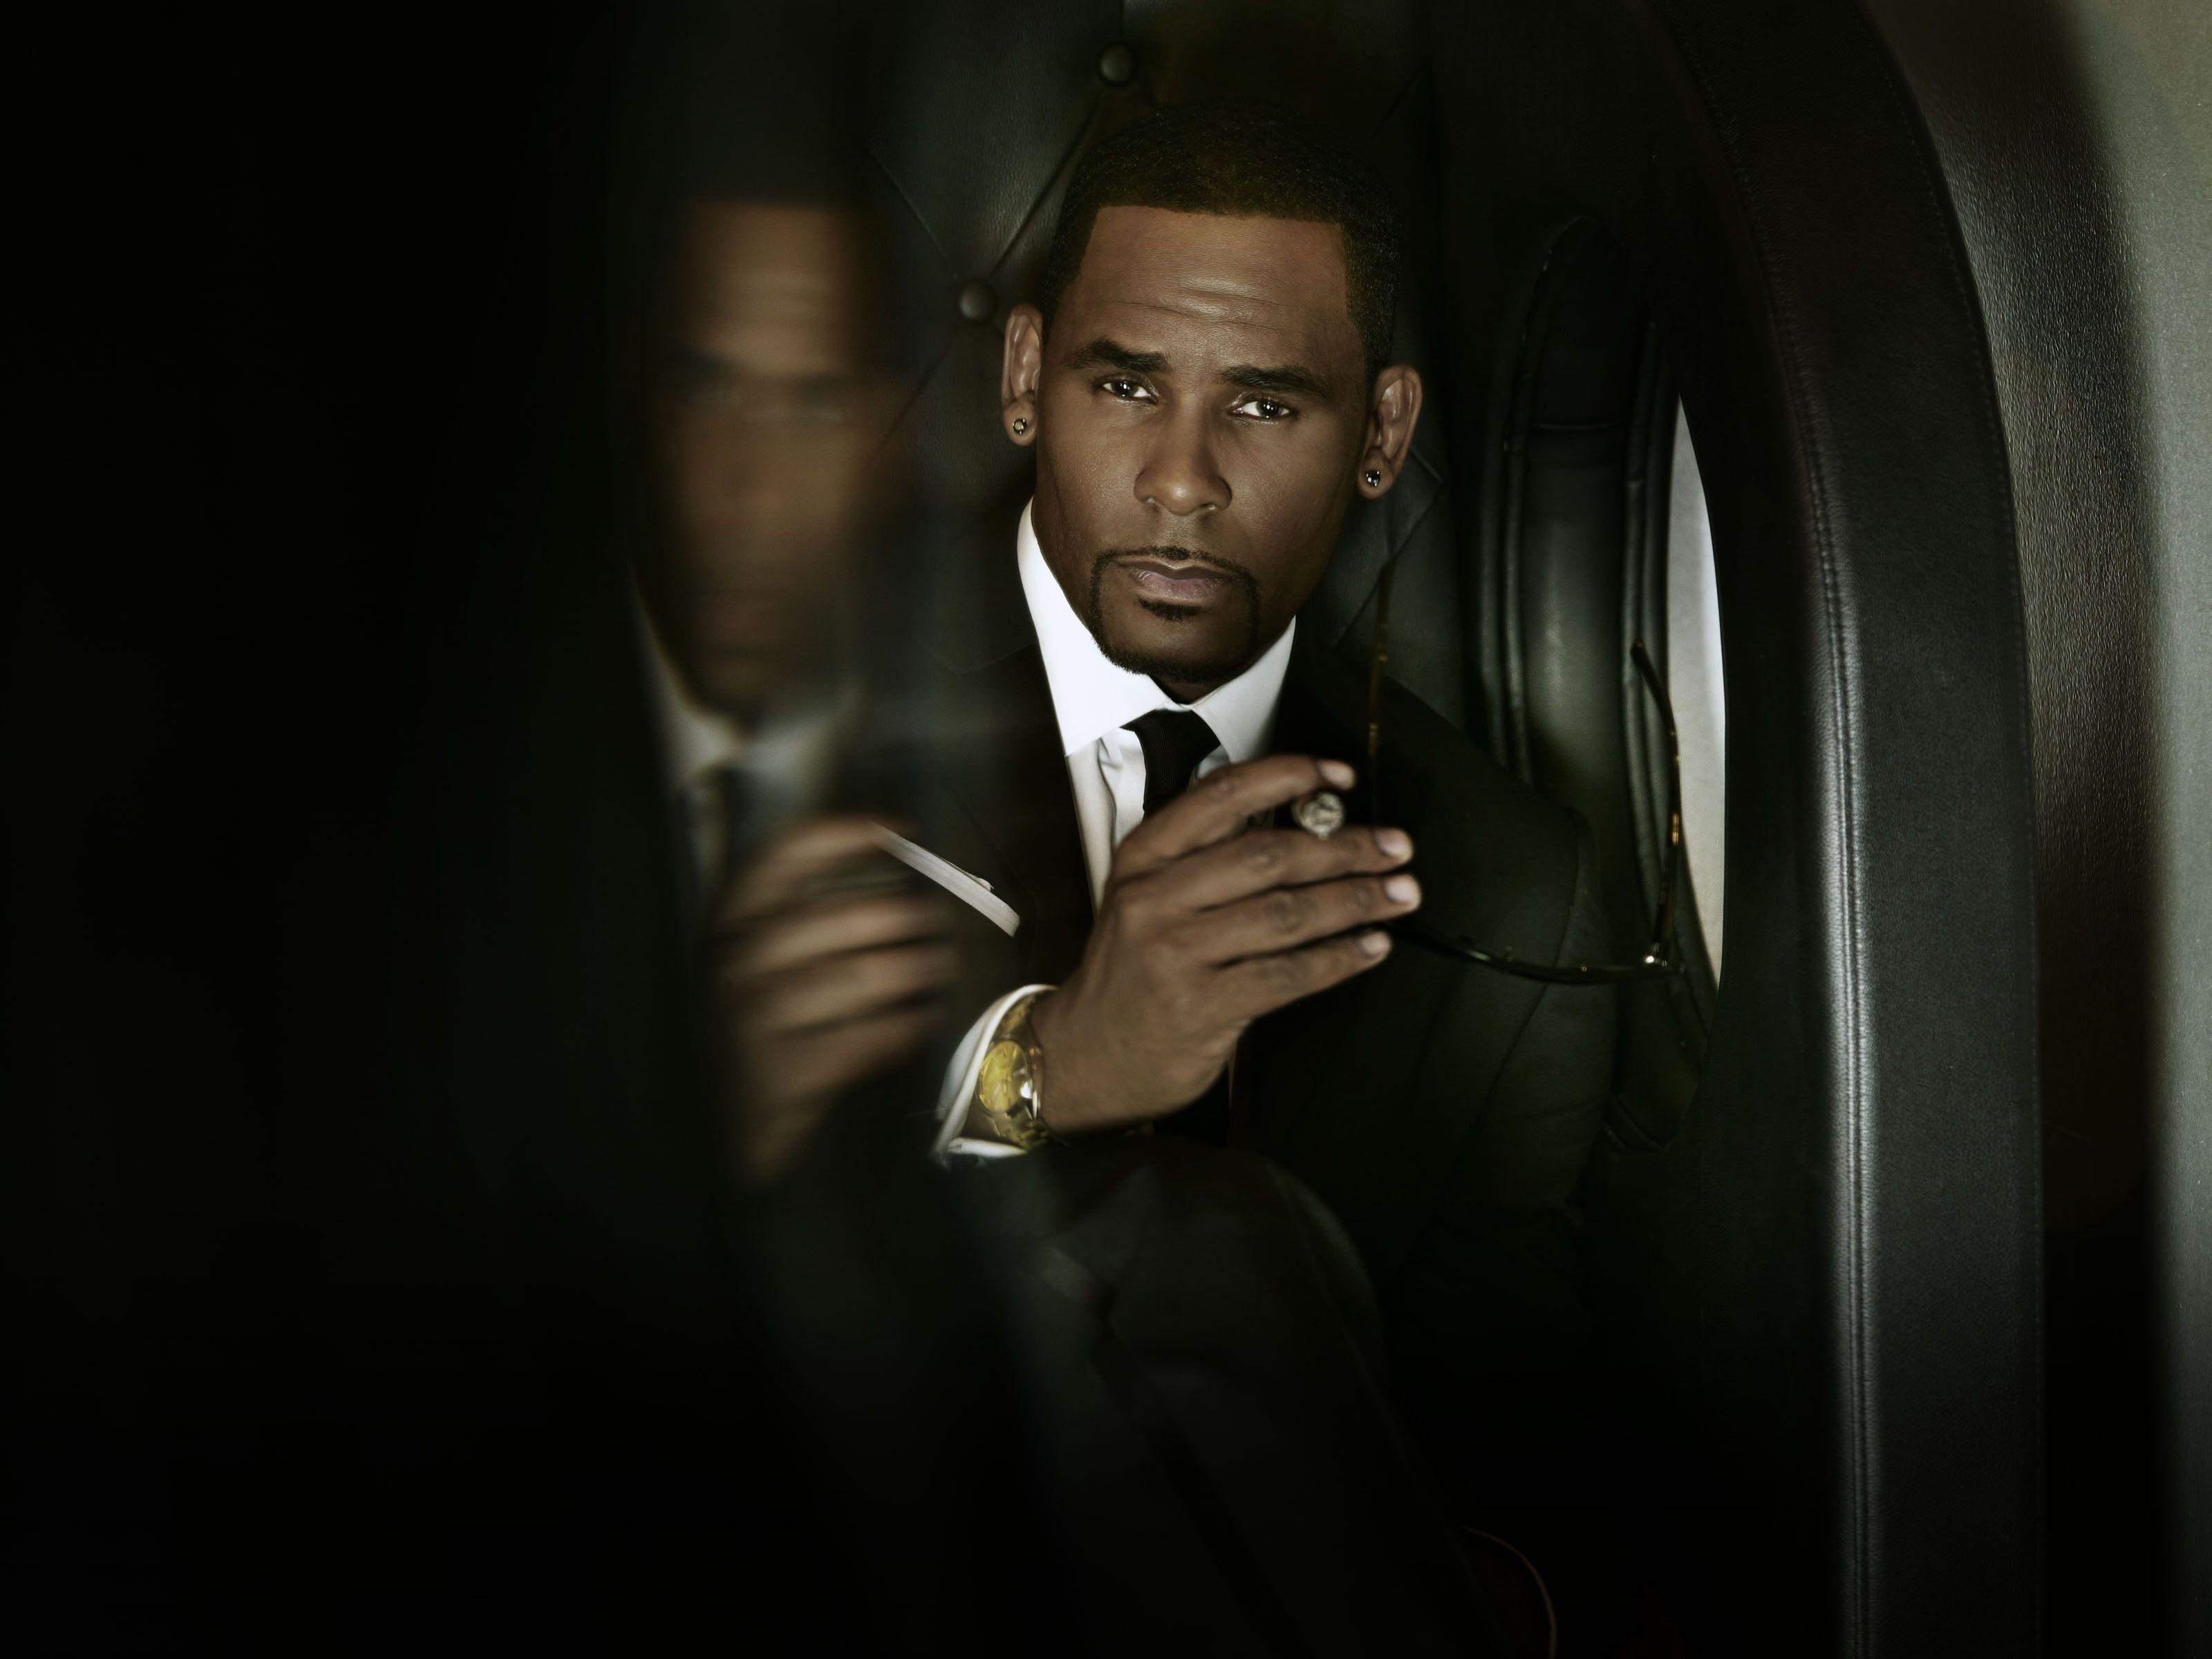 R.Kelly Wallpaper Image Photo Picture Background